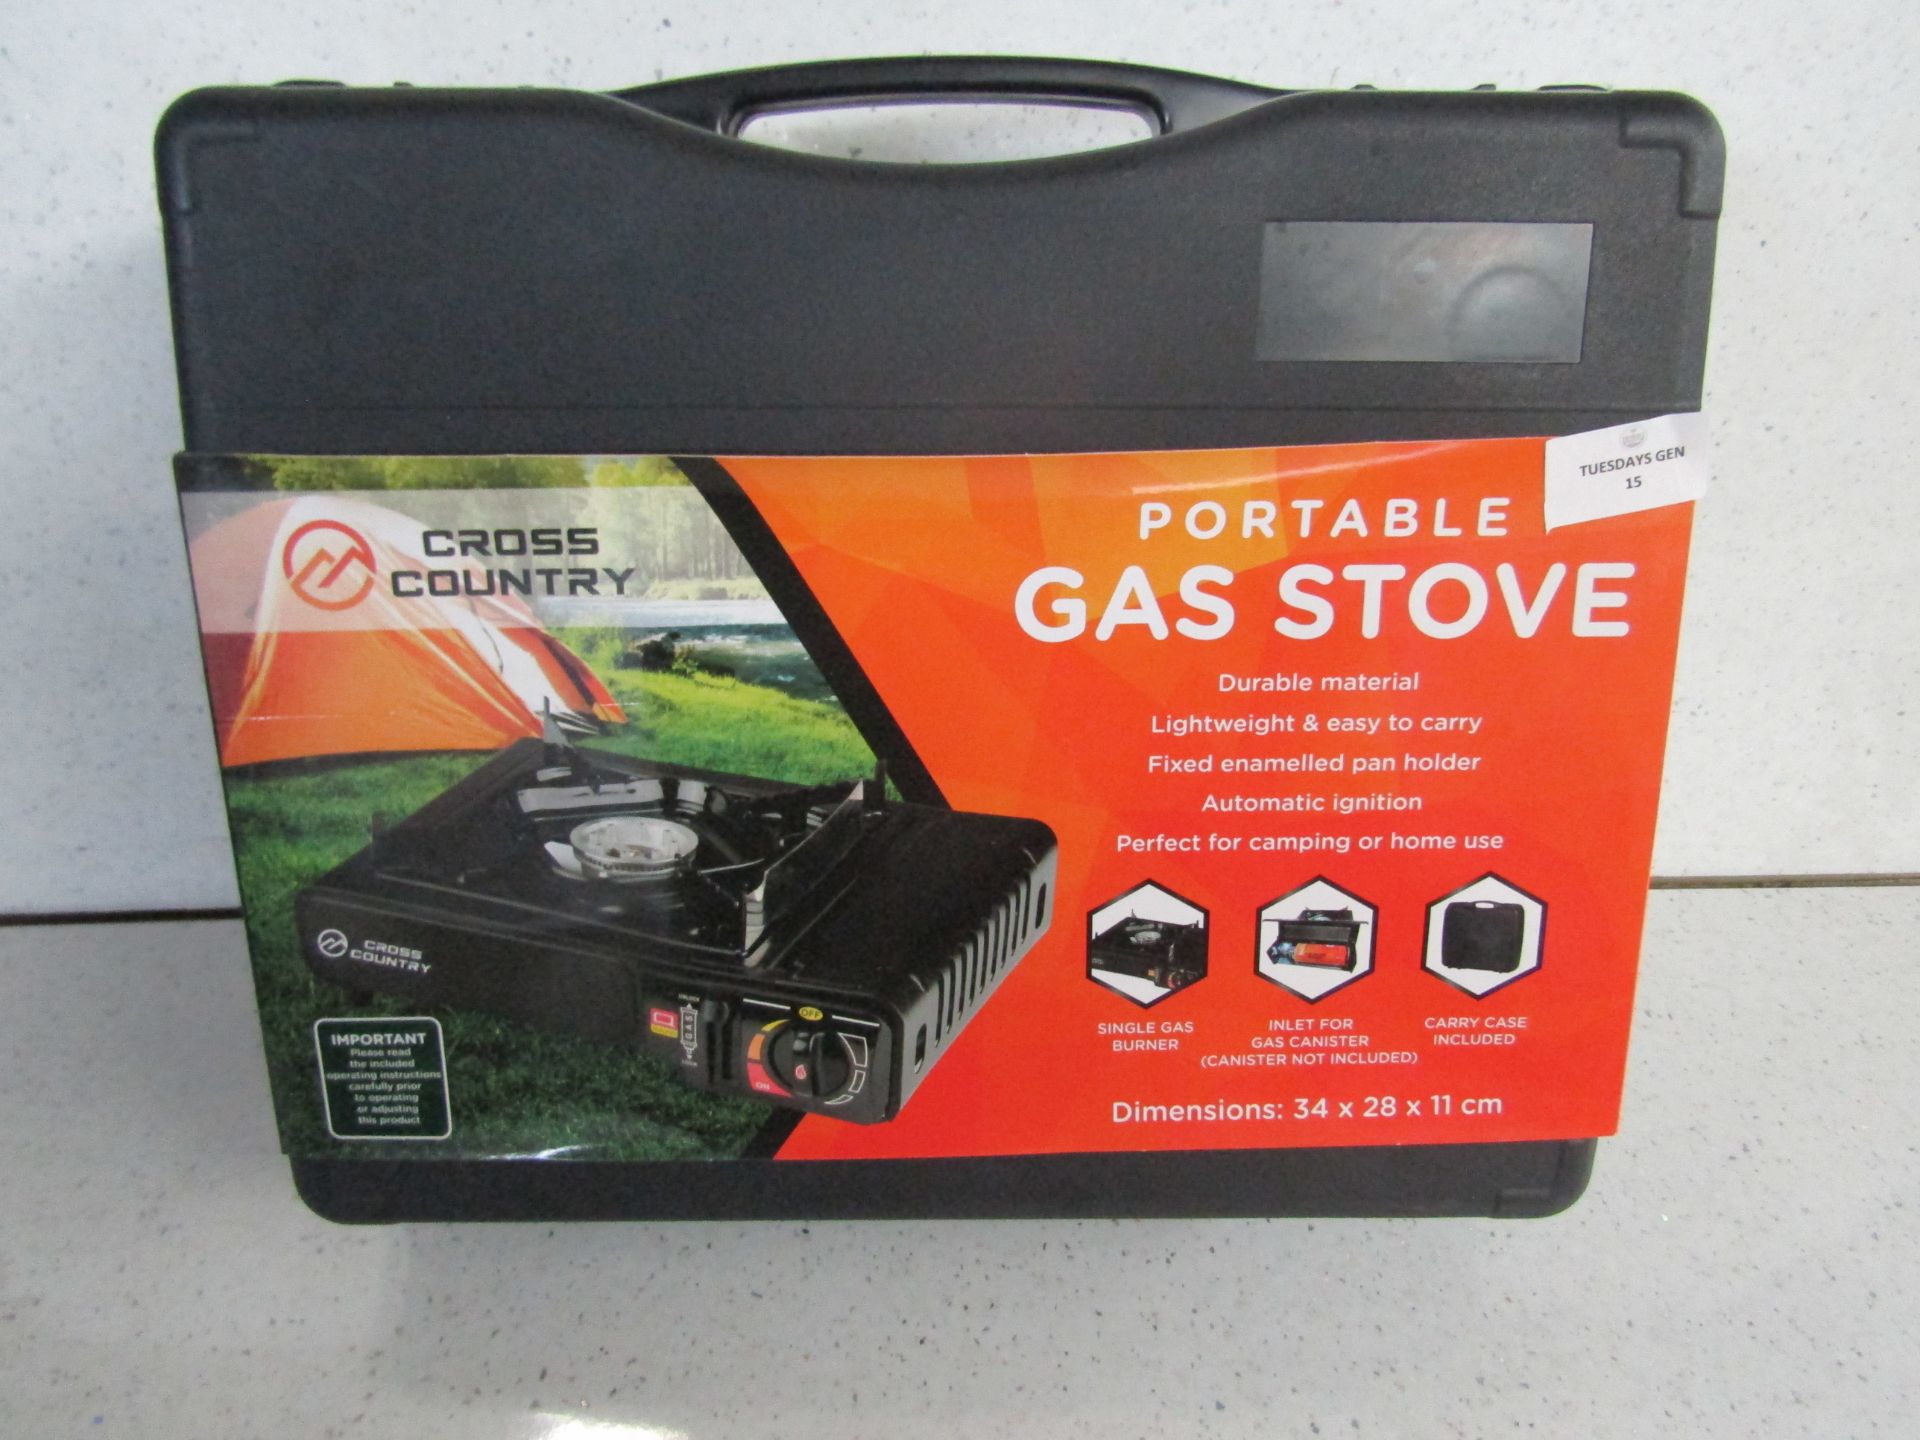 Cross Country - Portable Gas Stove - Looks In Good Condition.